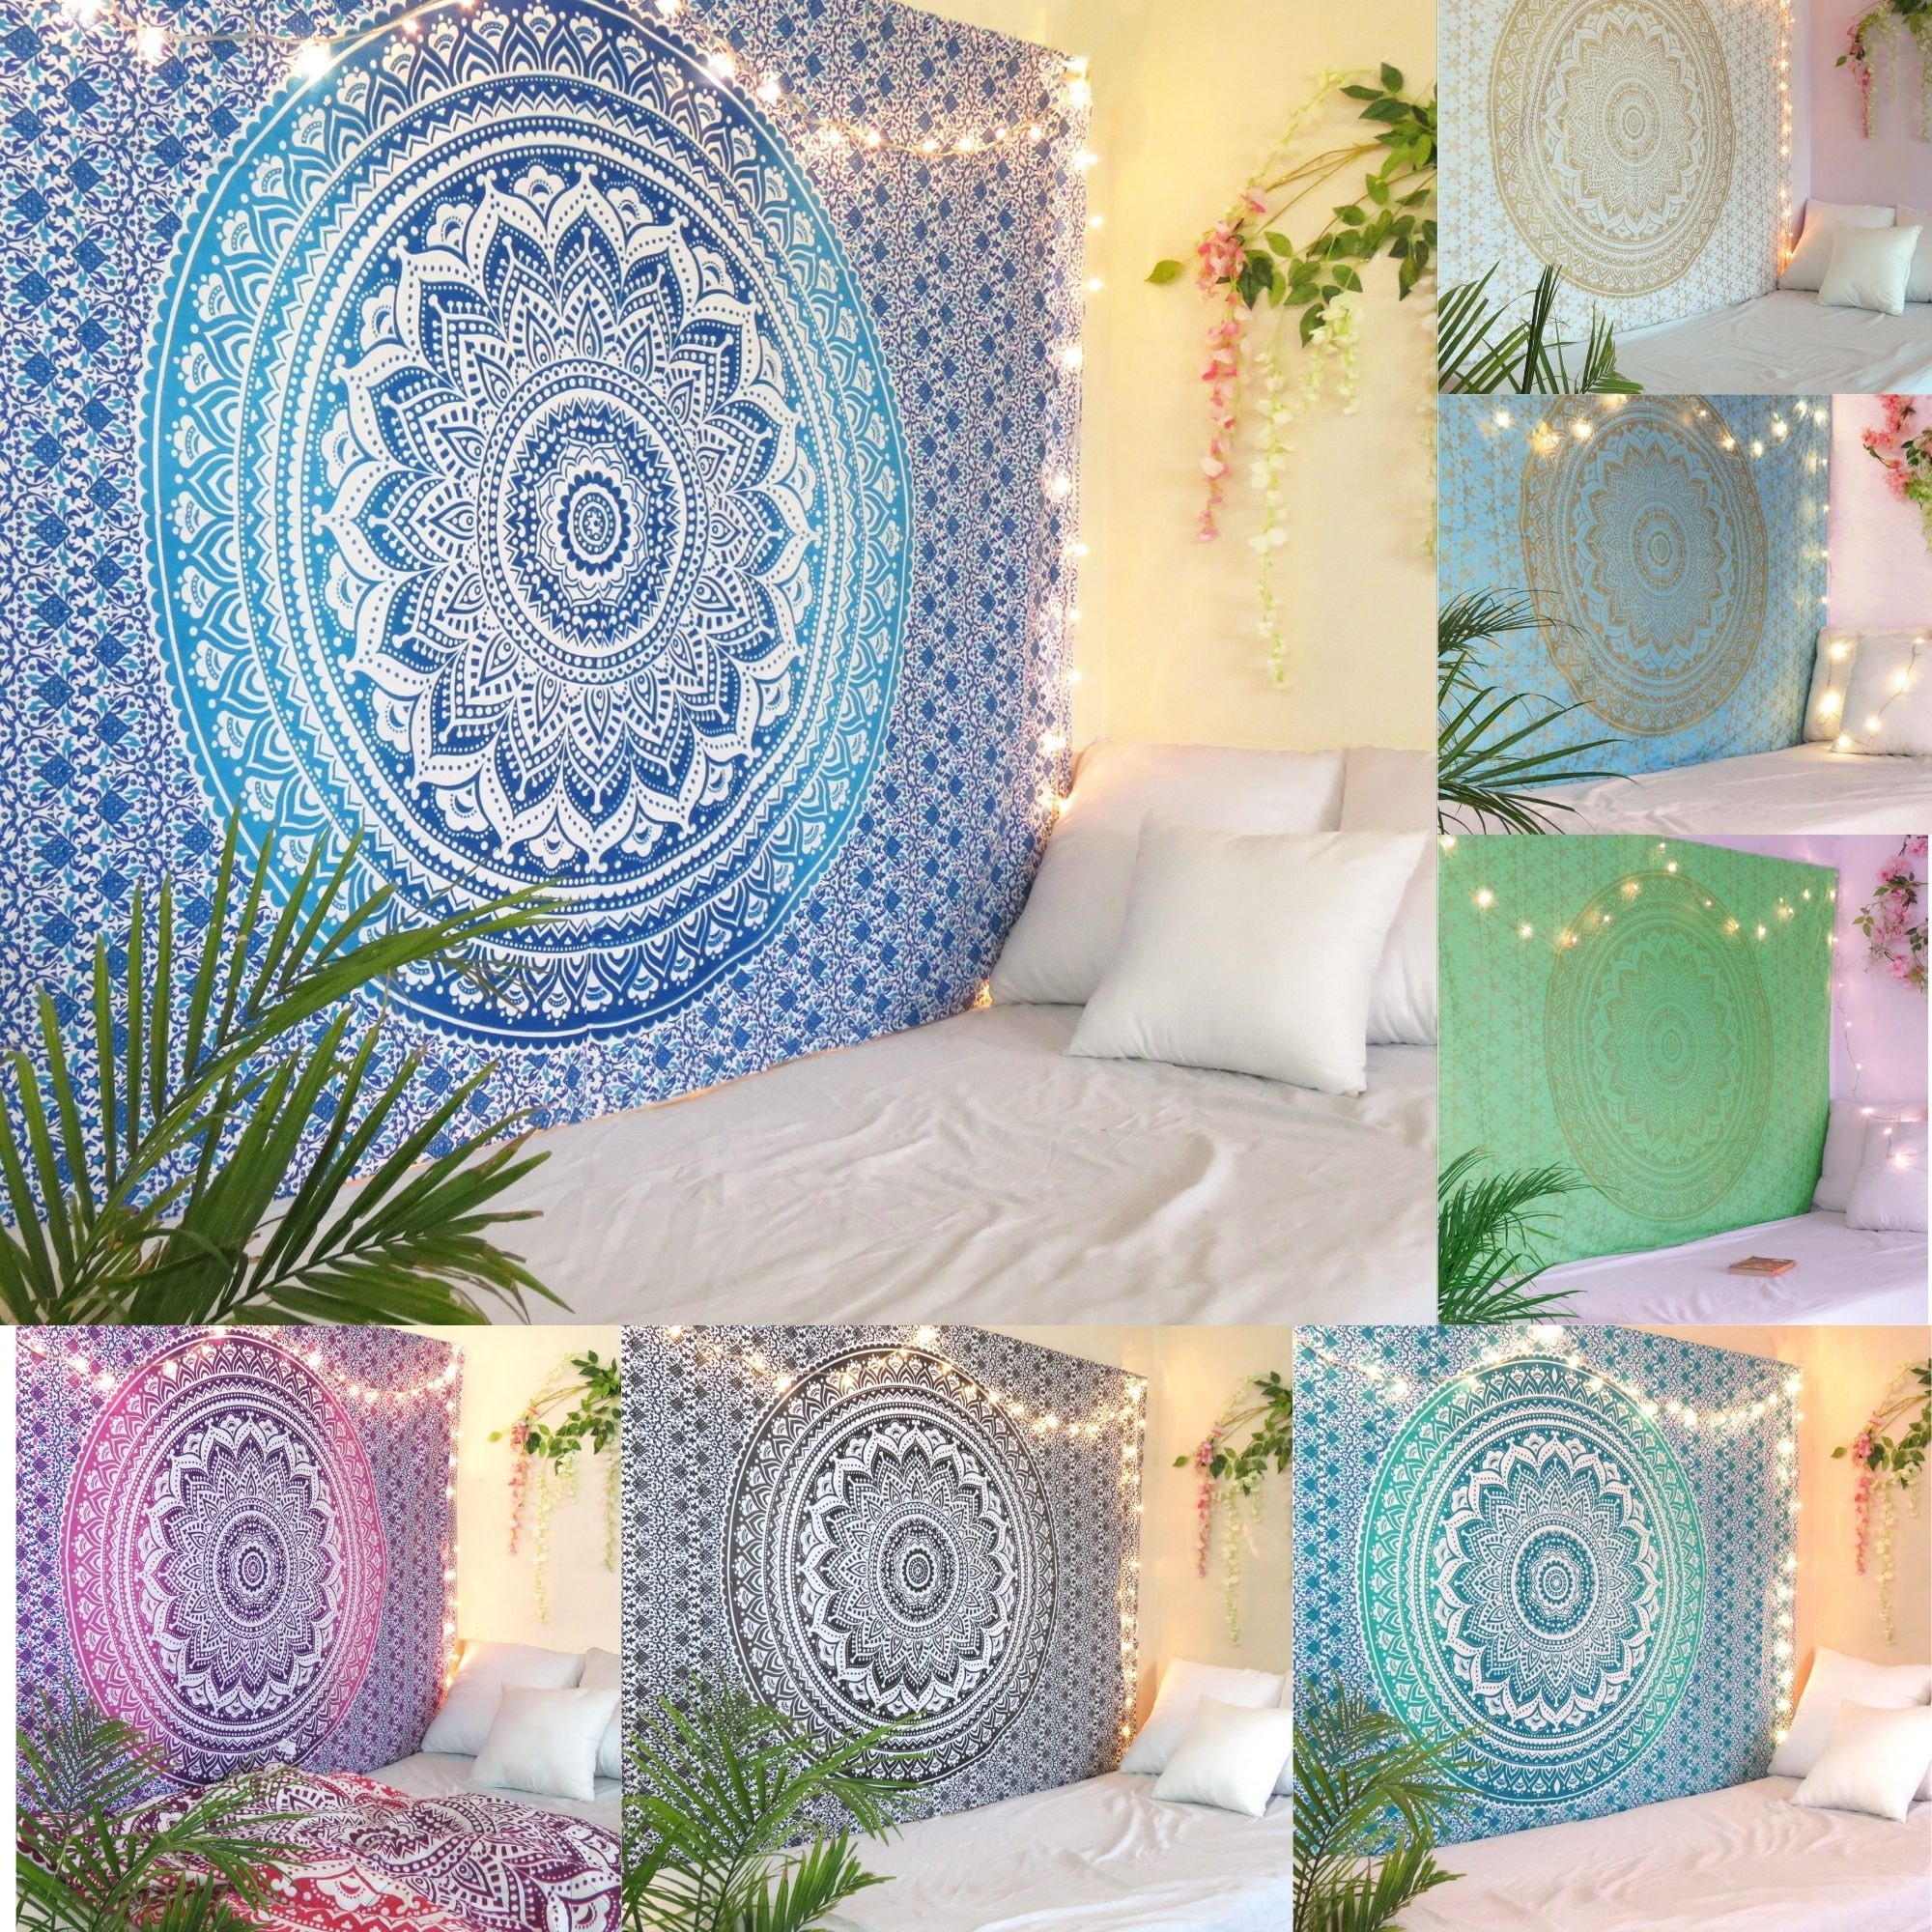 Mandala Printed Wall Tapestry Hanging New Hippie Room Home Decoration Bedspread 